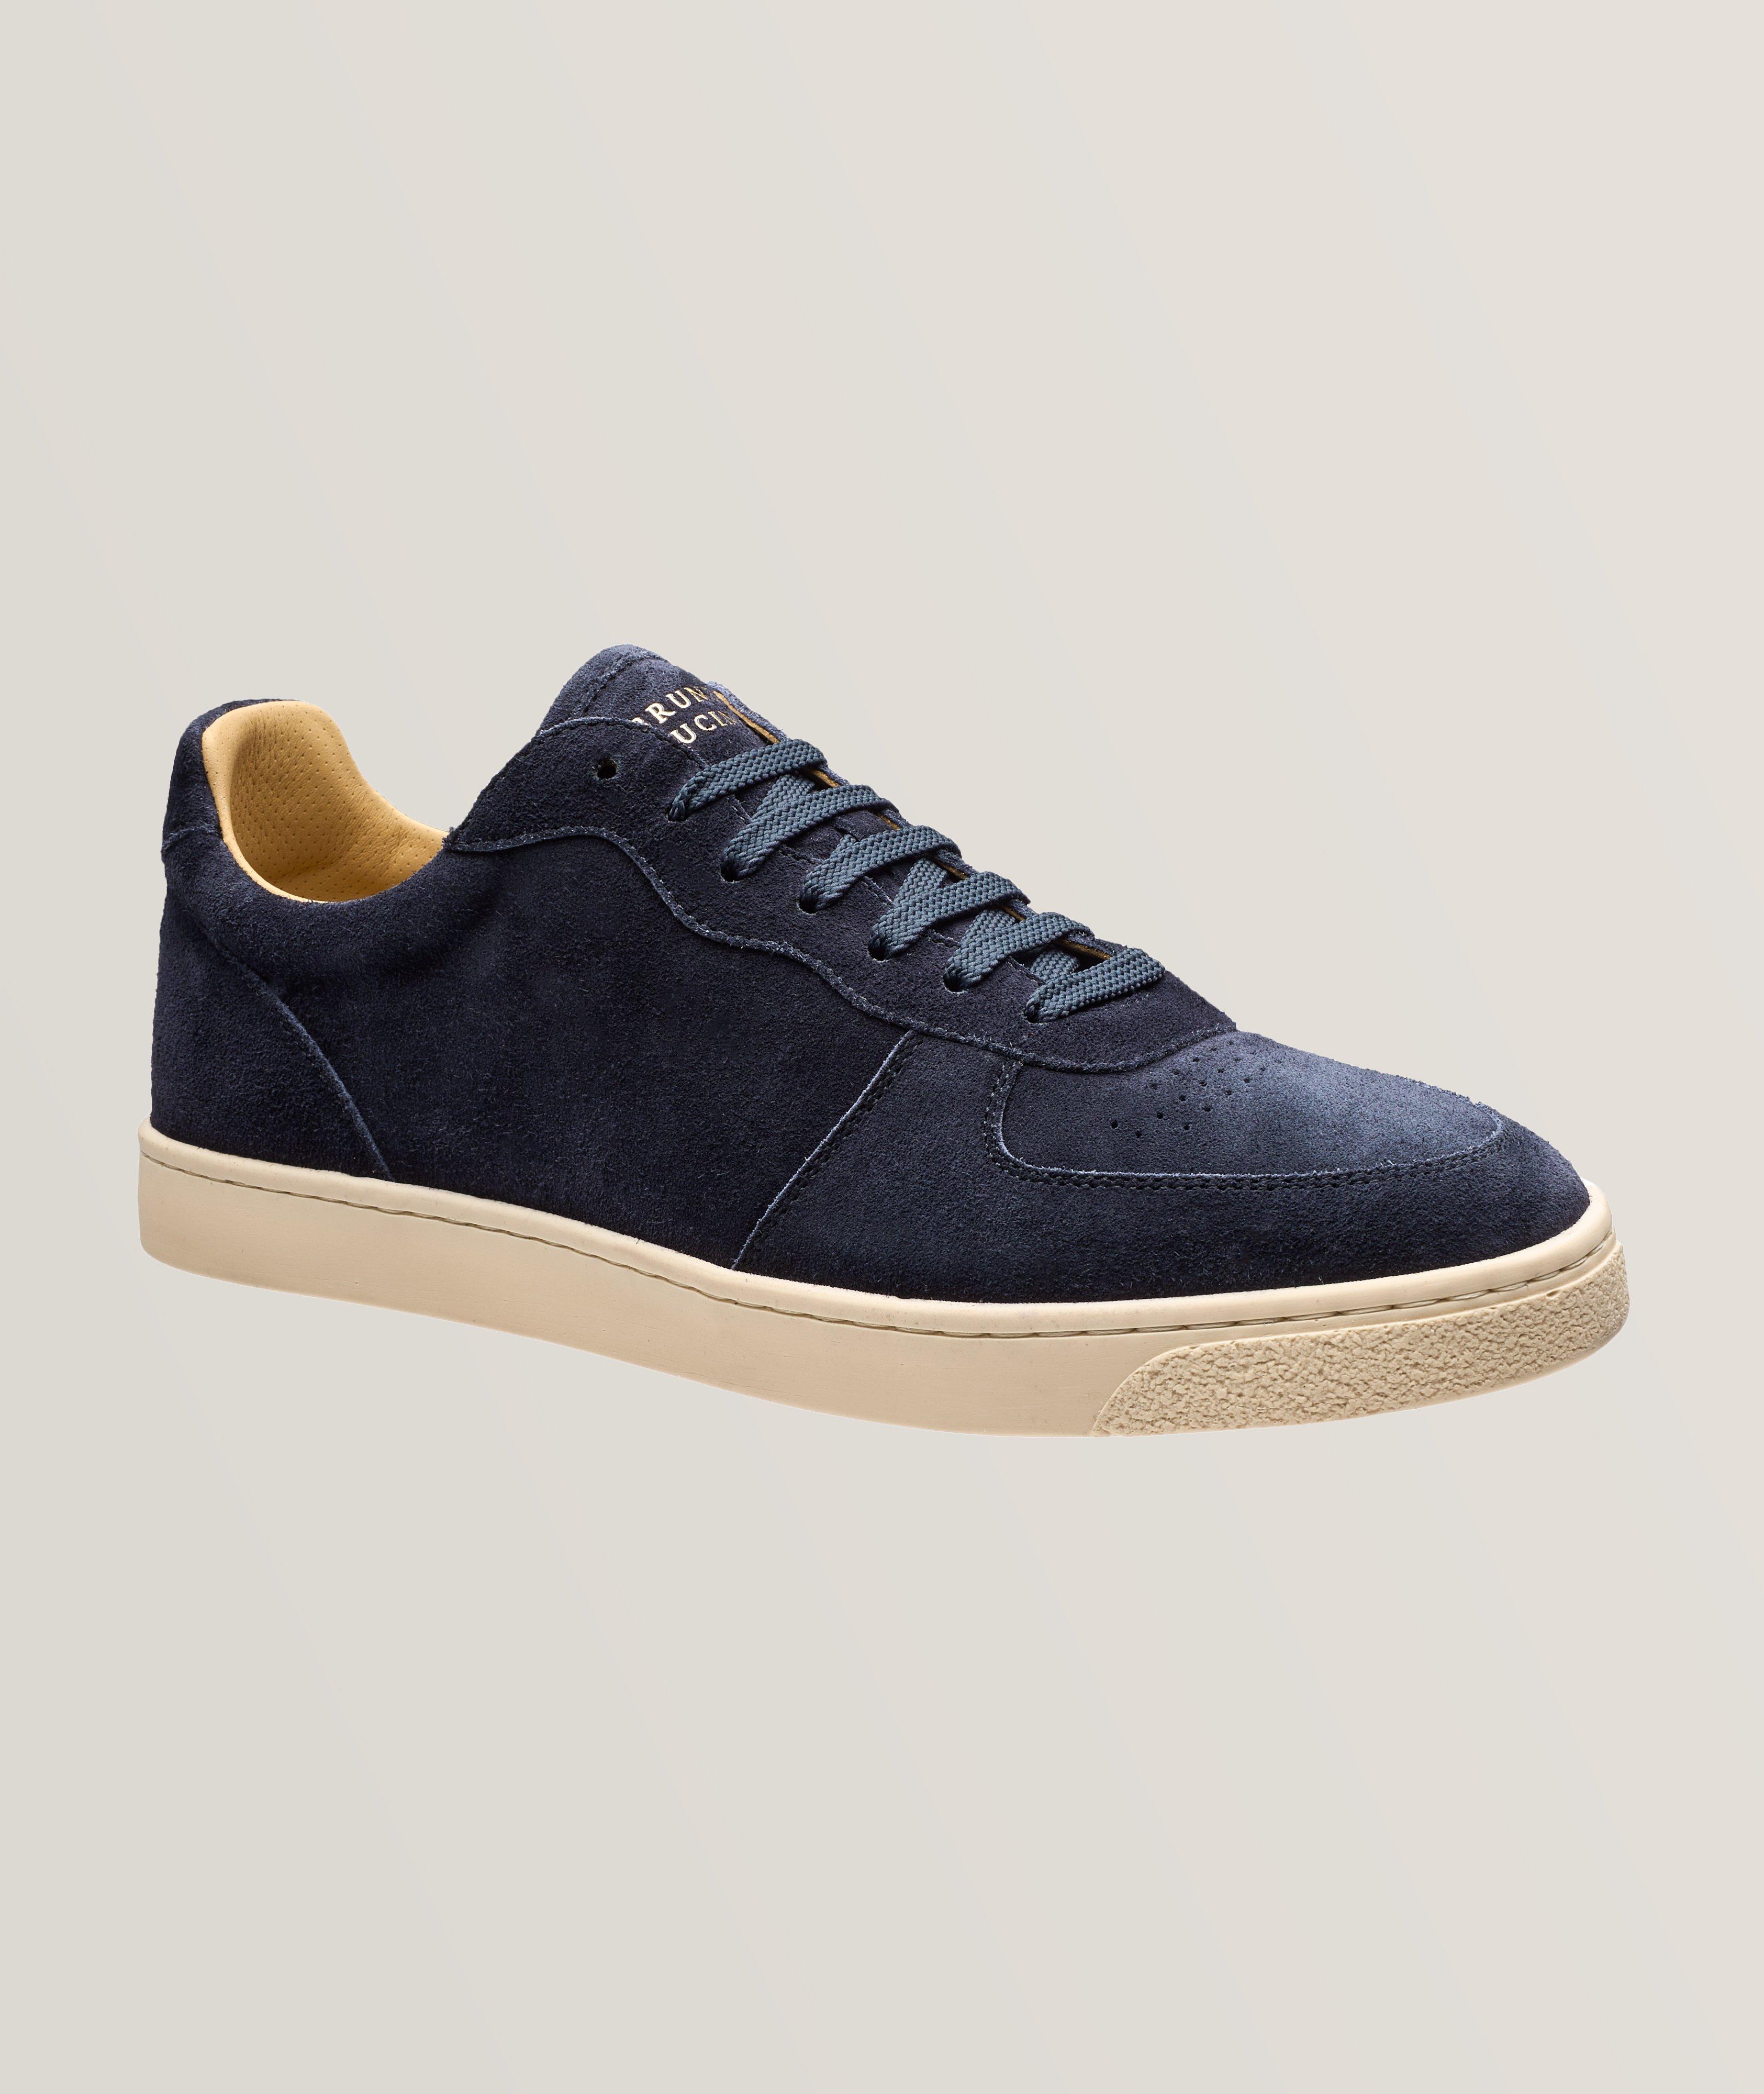 Common Projects Contrast Lace Running Shoes in Blue for Men